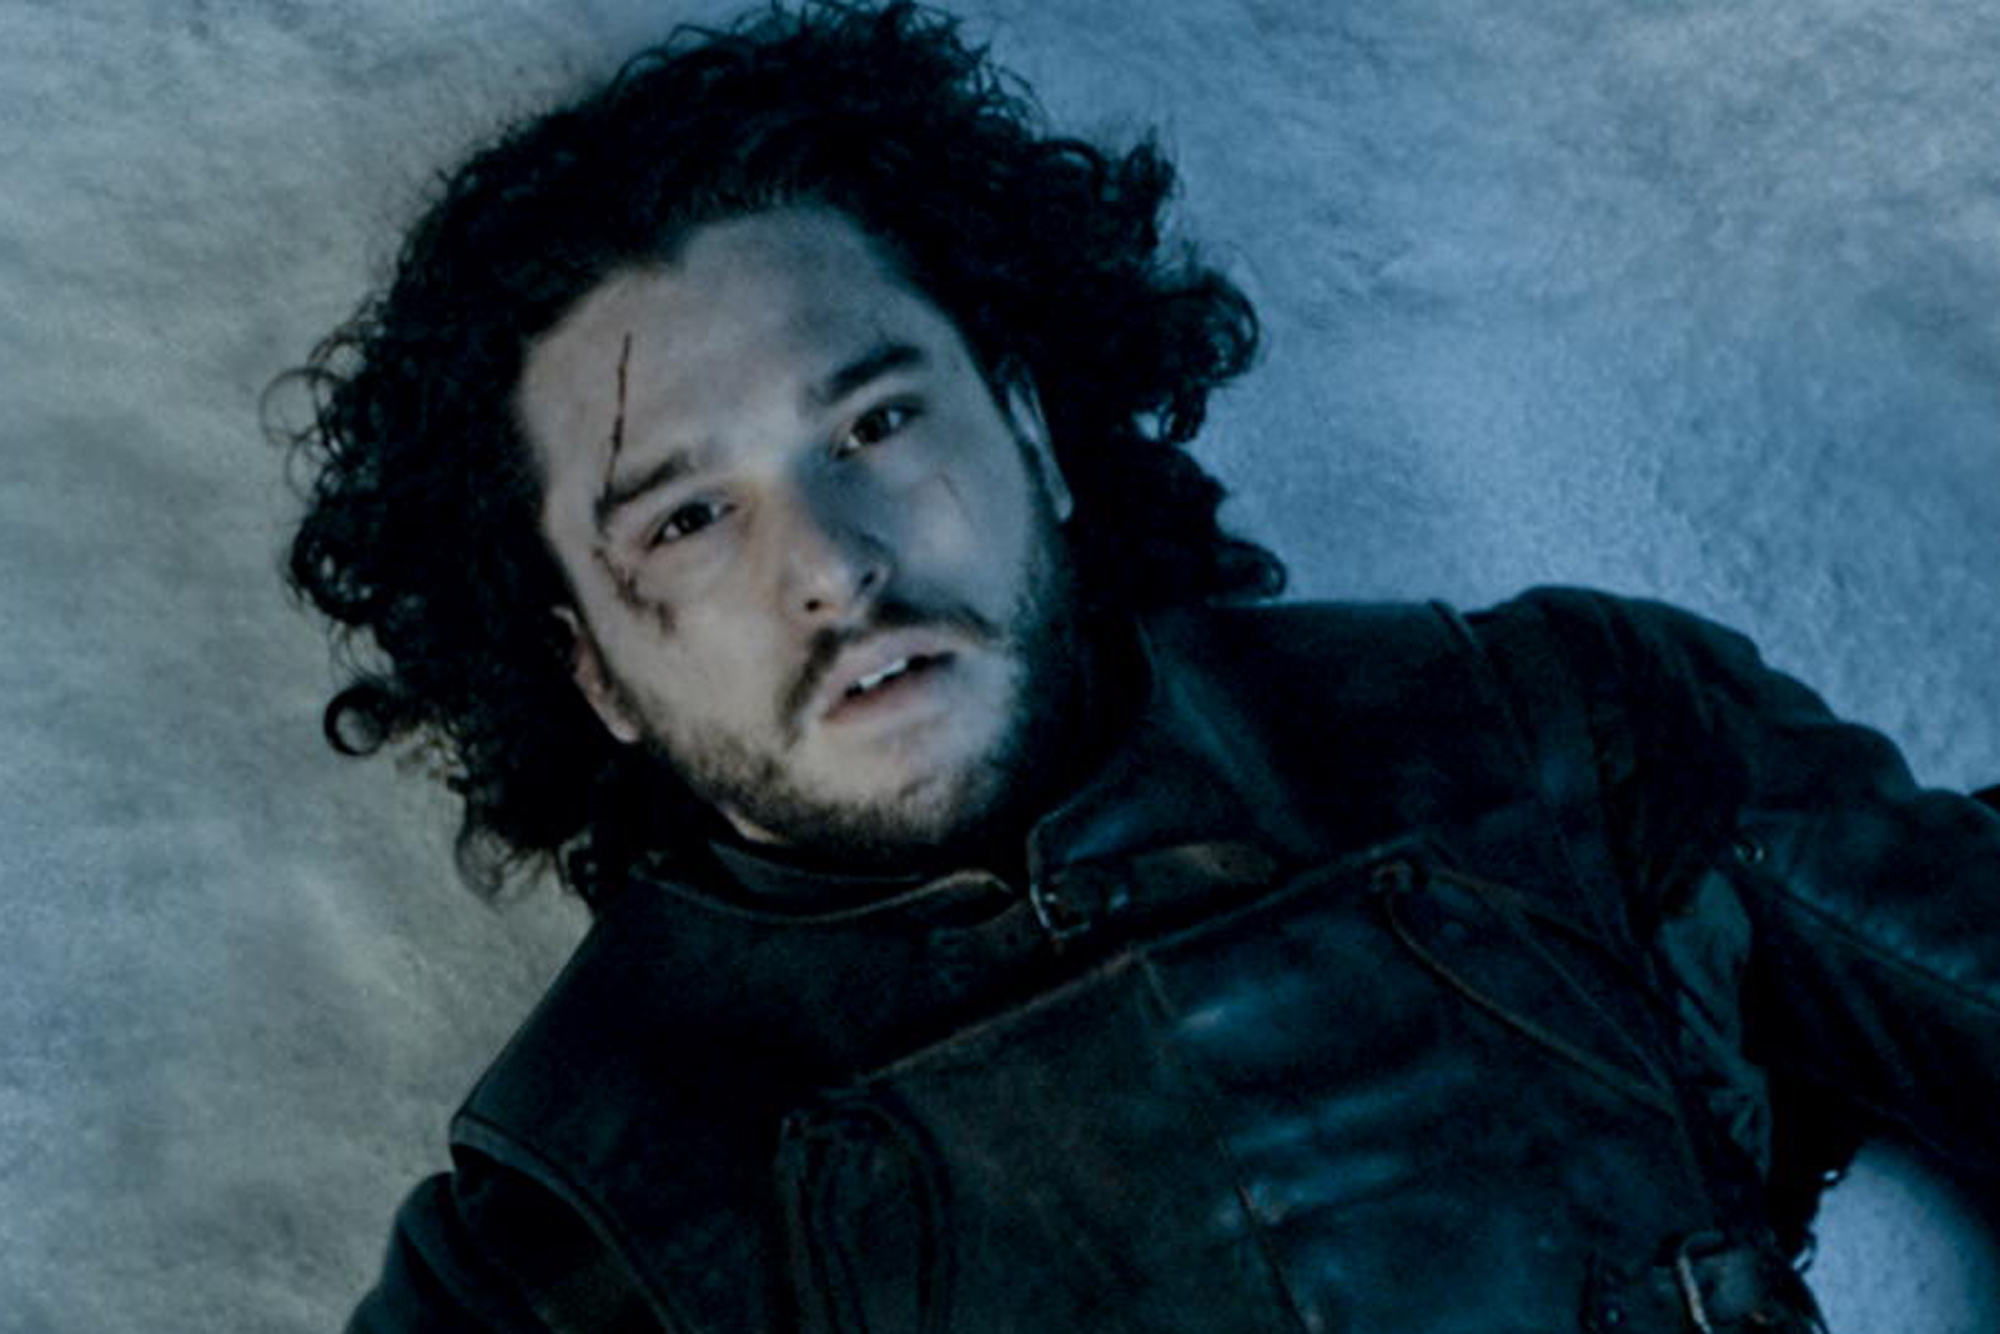 TV STILL -- DO NOT PURGE -- episode 510 -- GAME OF THRONES, titled "Mothers Mercy." Pictured: Kit Harington as Jon Snow Photographer: HBO